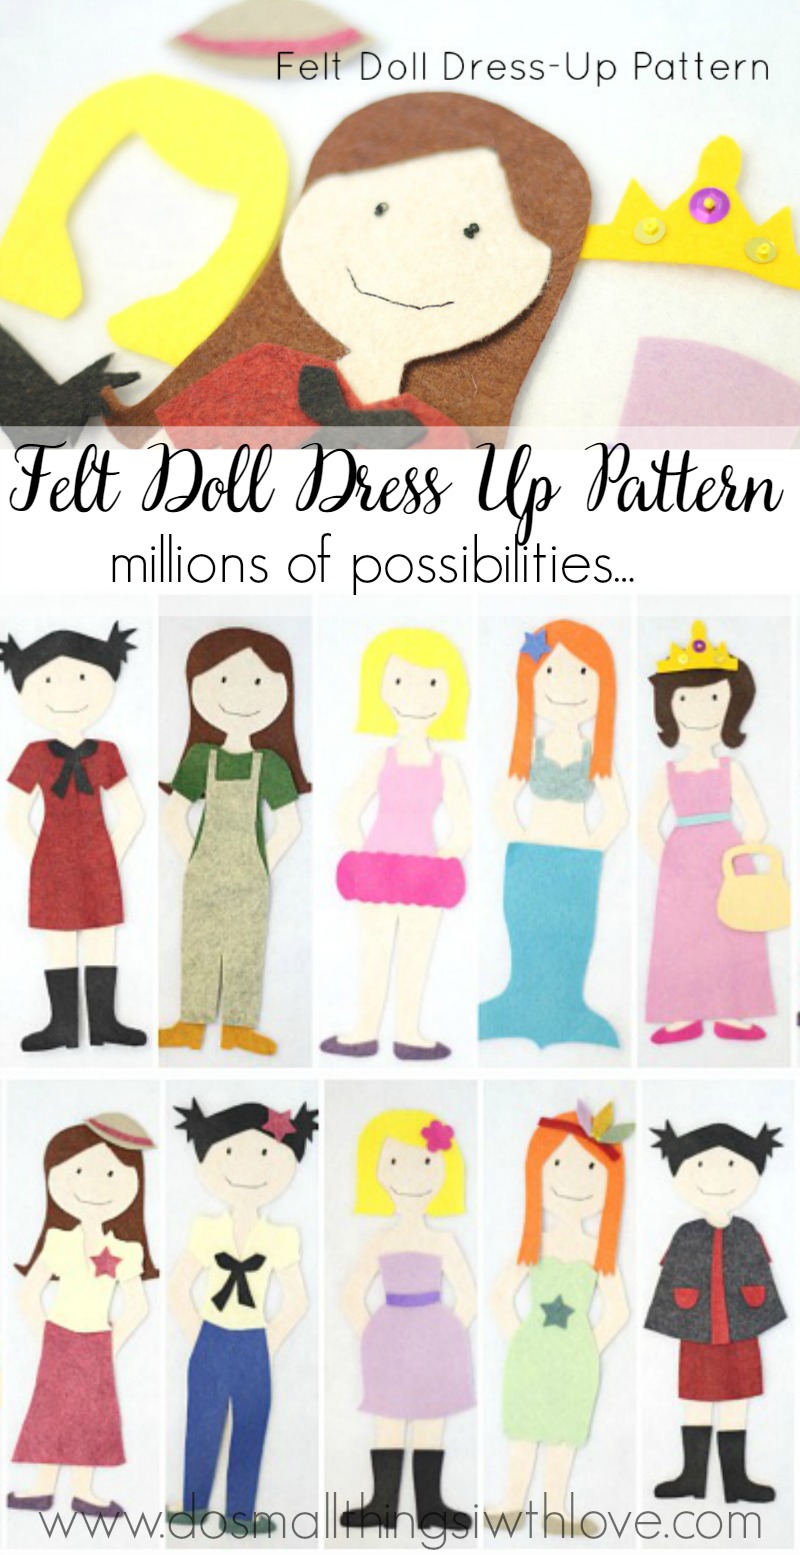 felt doll dress up pattern--available for only $1!